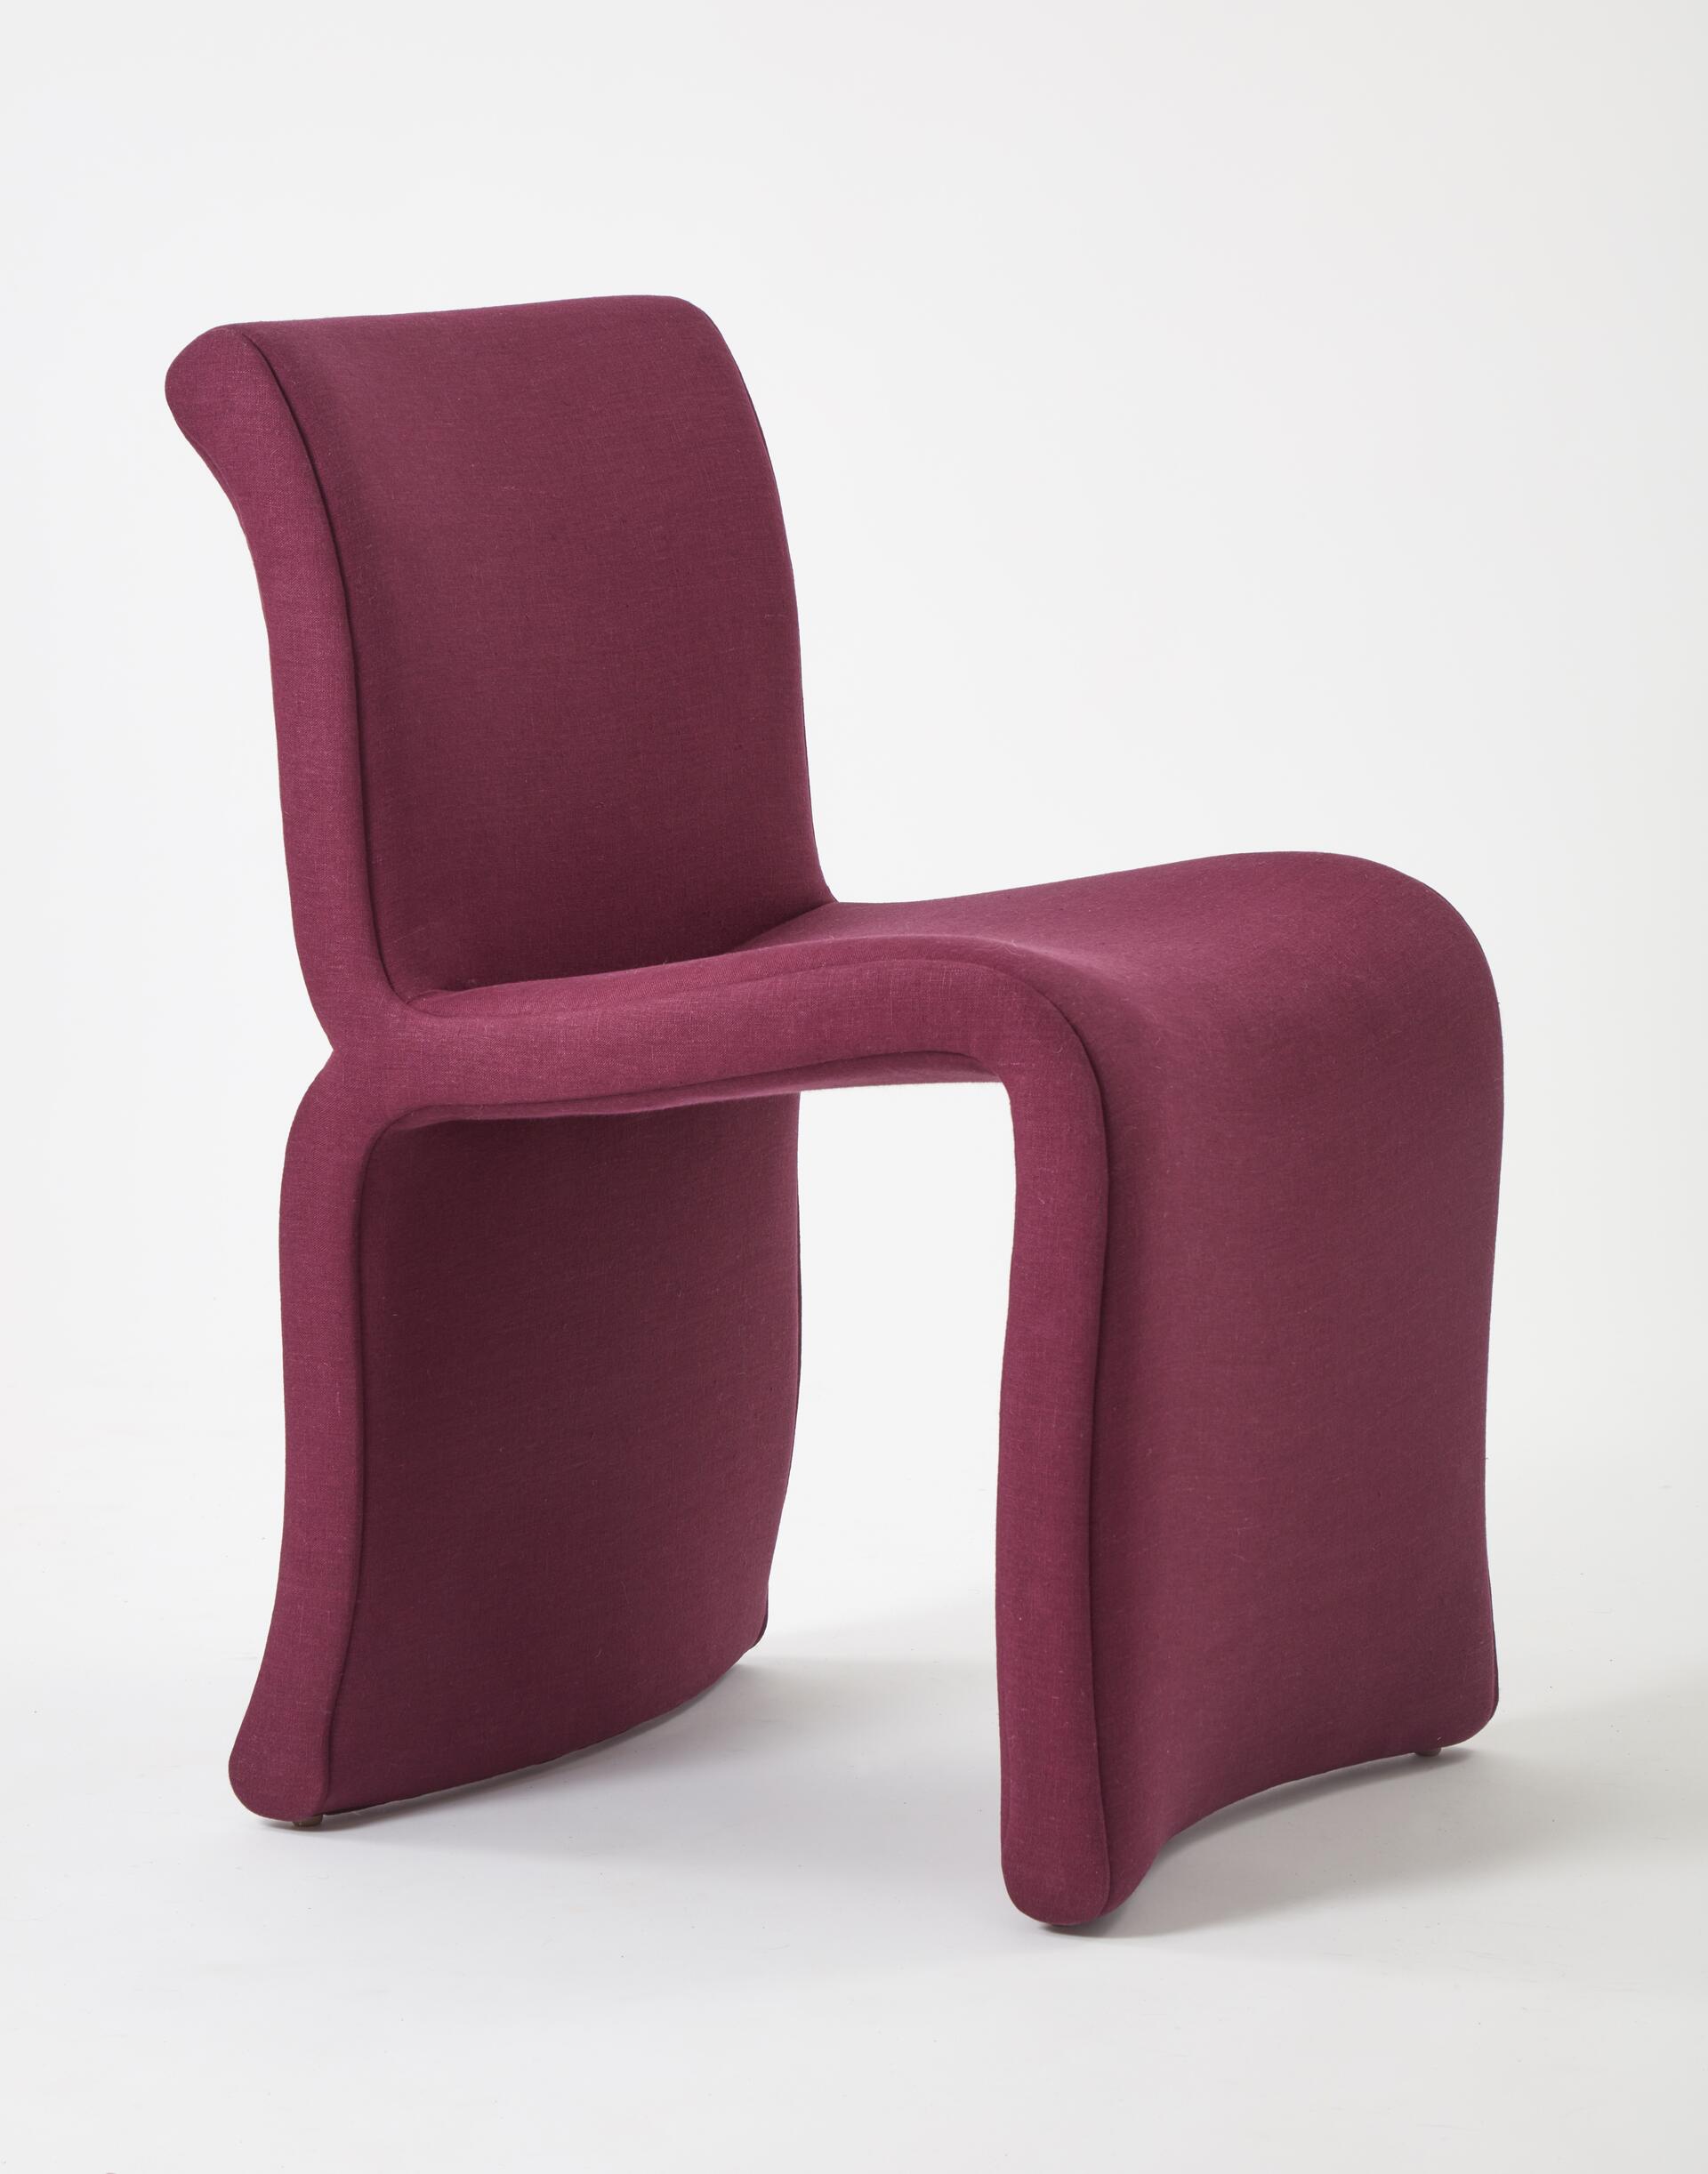 A modern upholstered dining chair with a deep purple belgian linen fabric featuring curved lines and no armrests